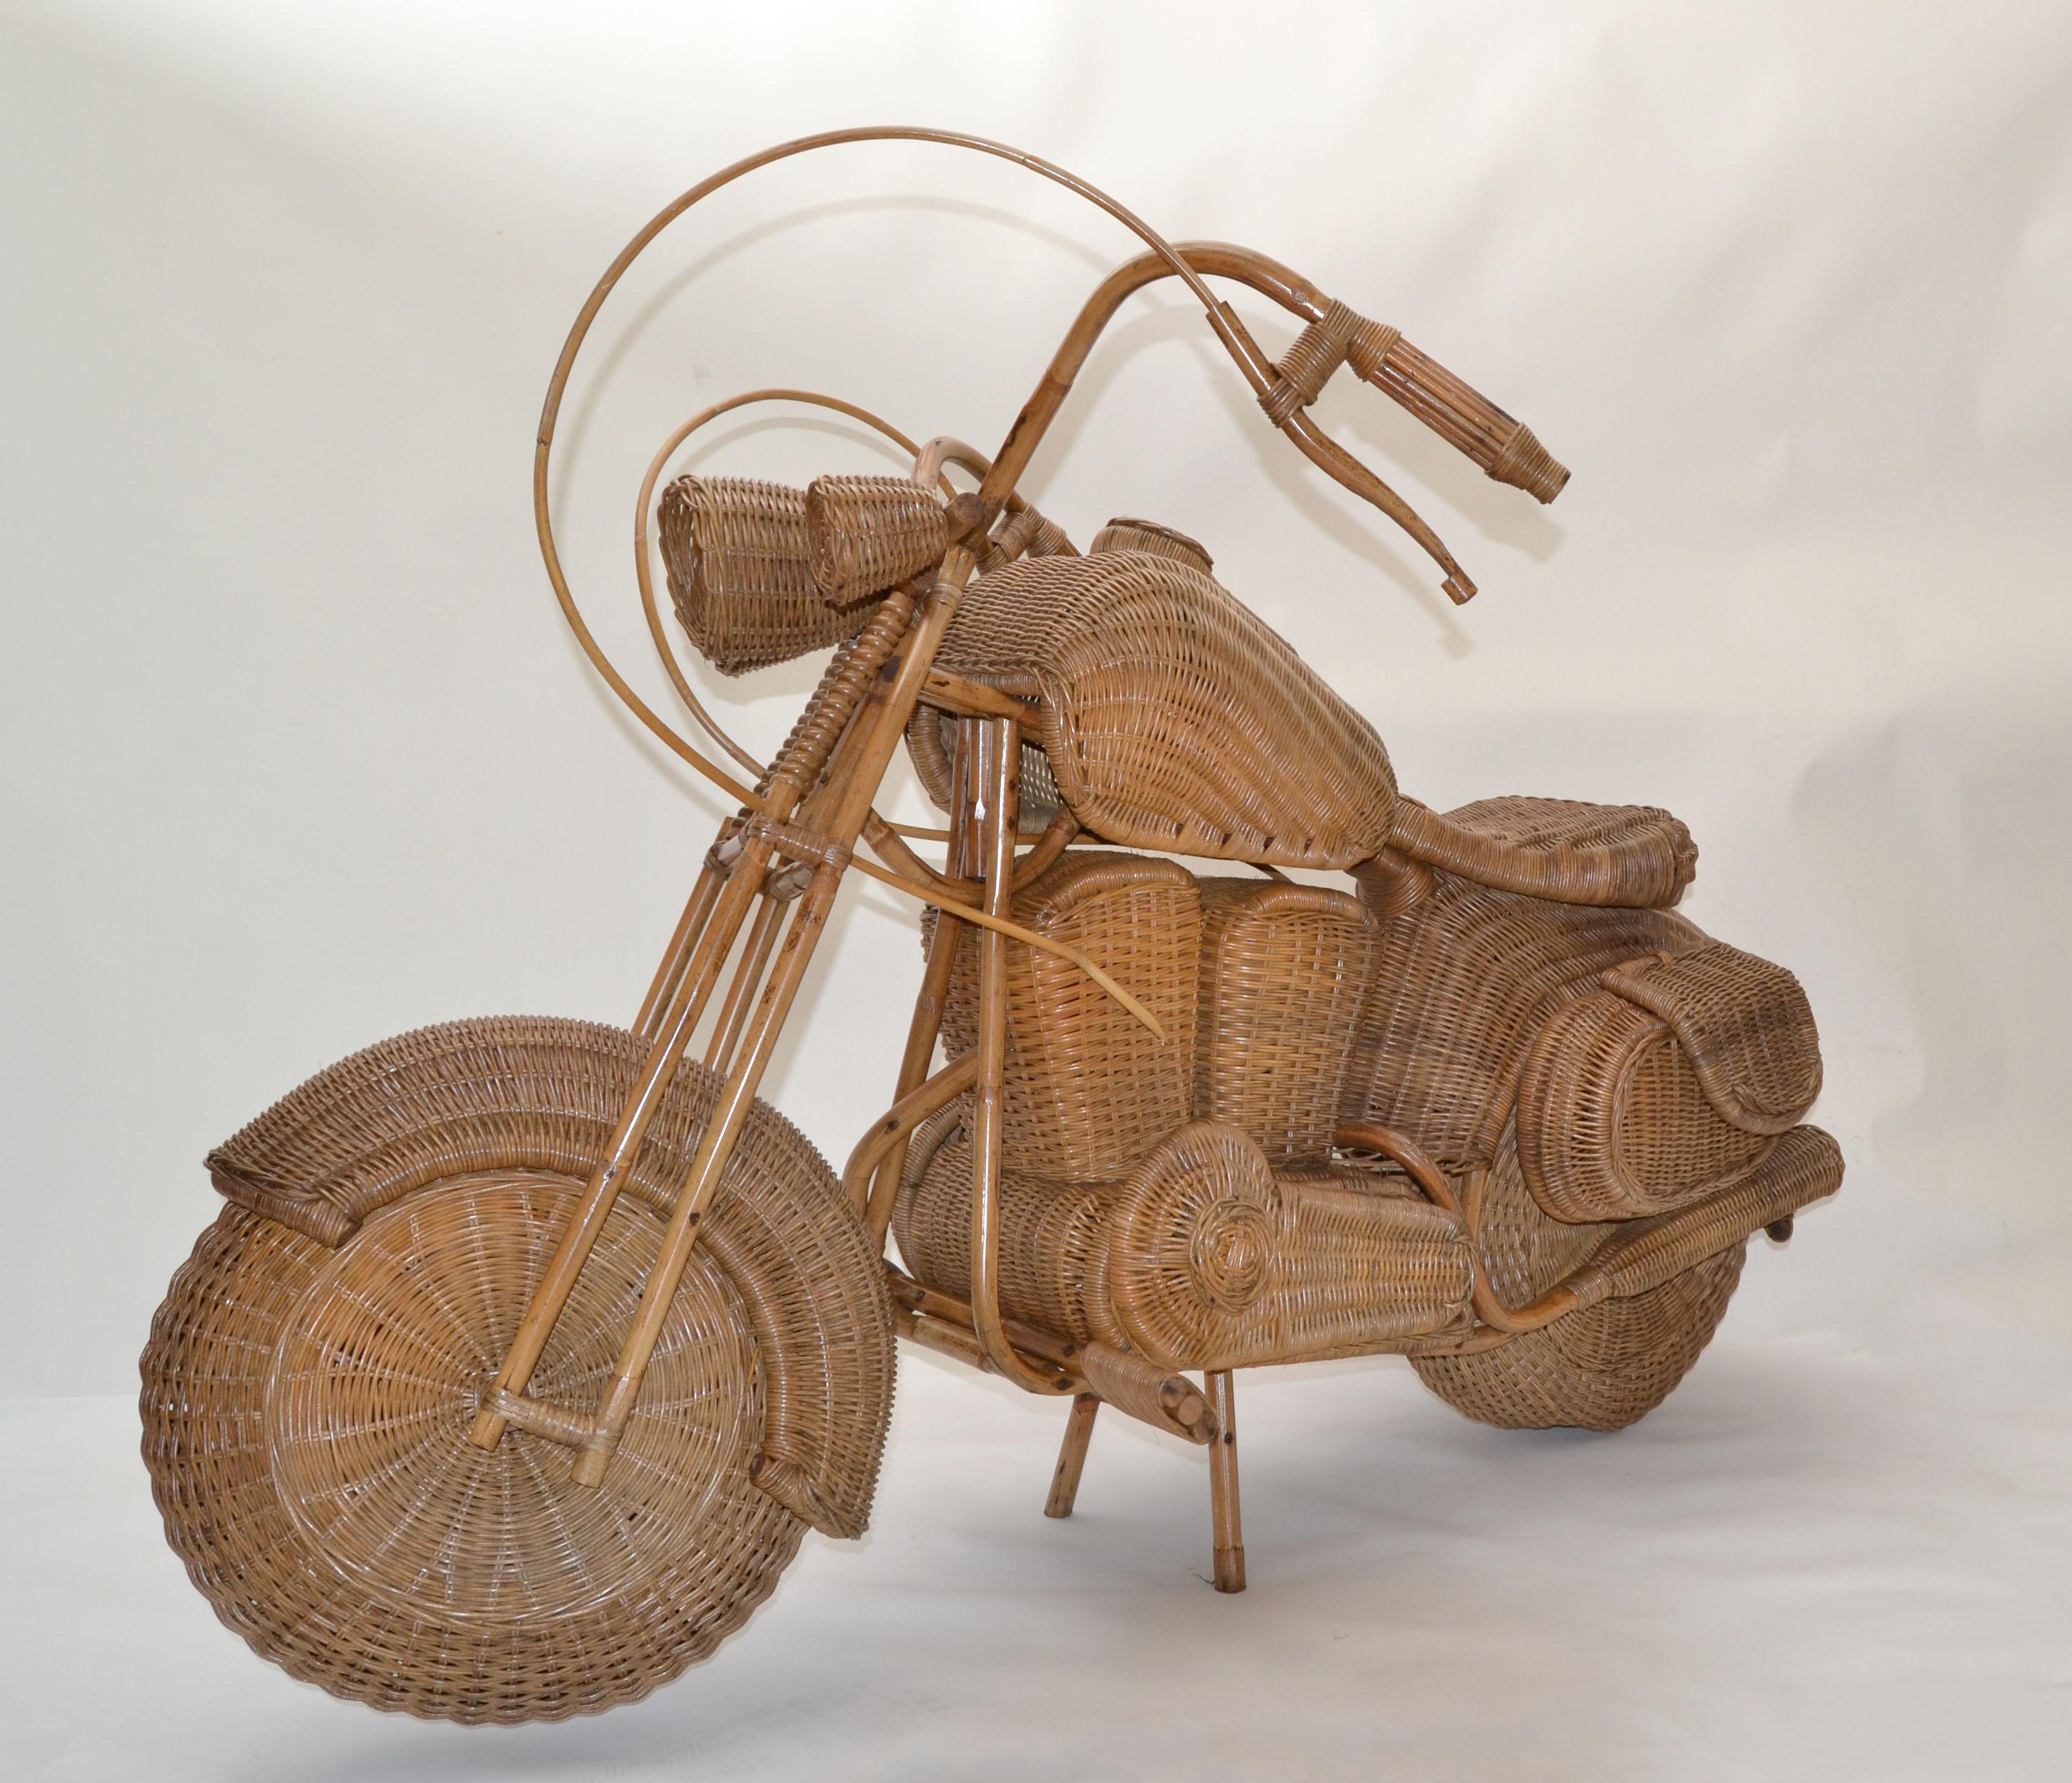 20th Century Tom Dixon For Habitat Stores Wicker Life-size Harley Davidson Sculpture For Sale